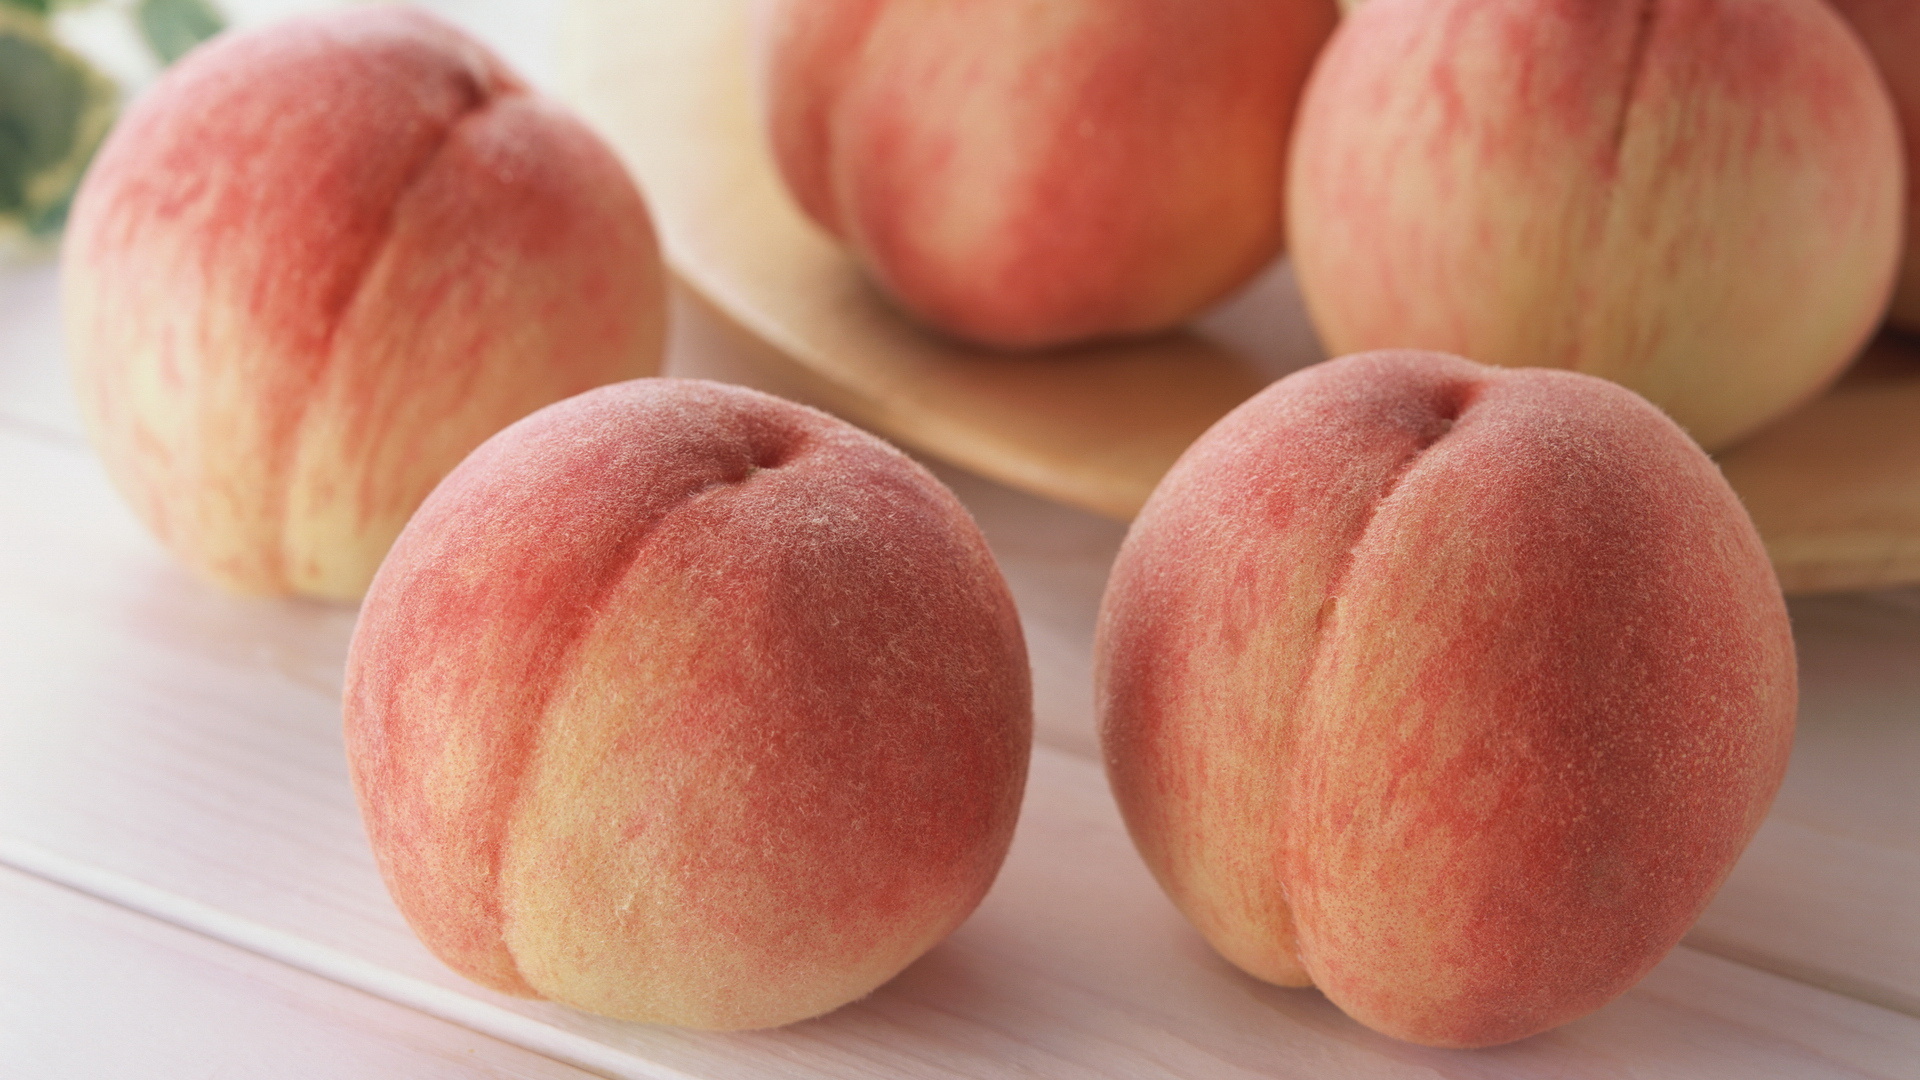 Peach: Covered with a velvety down, Food. 1920x1080 Full HD Wallpaper.